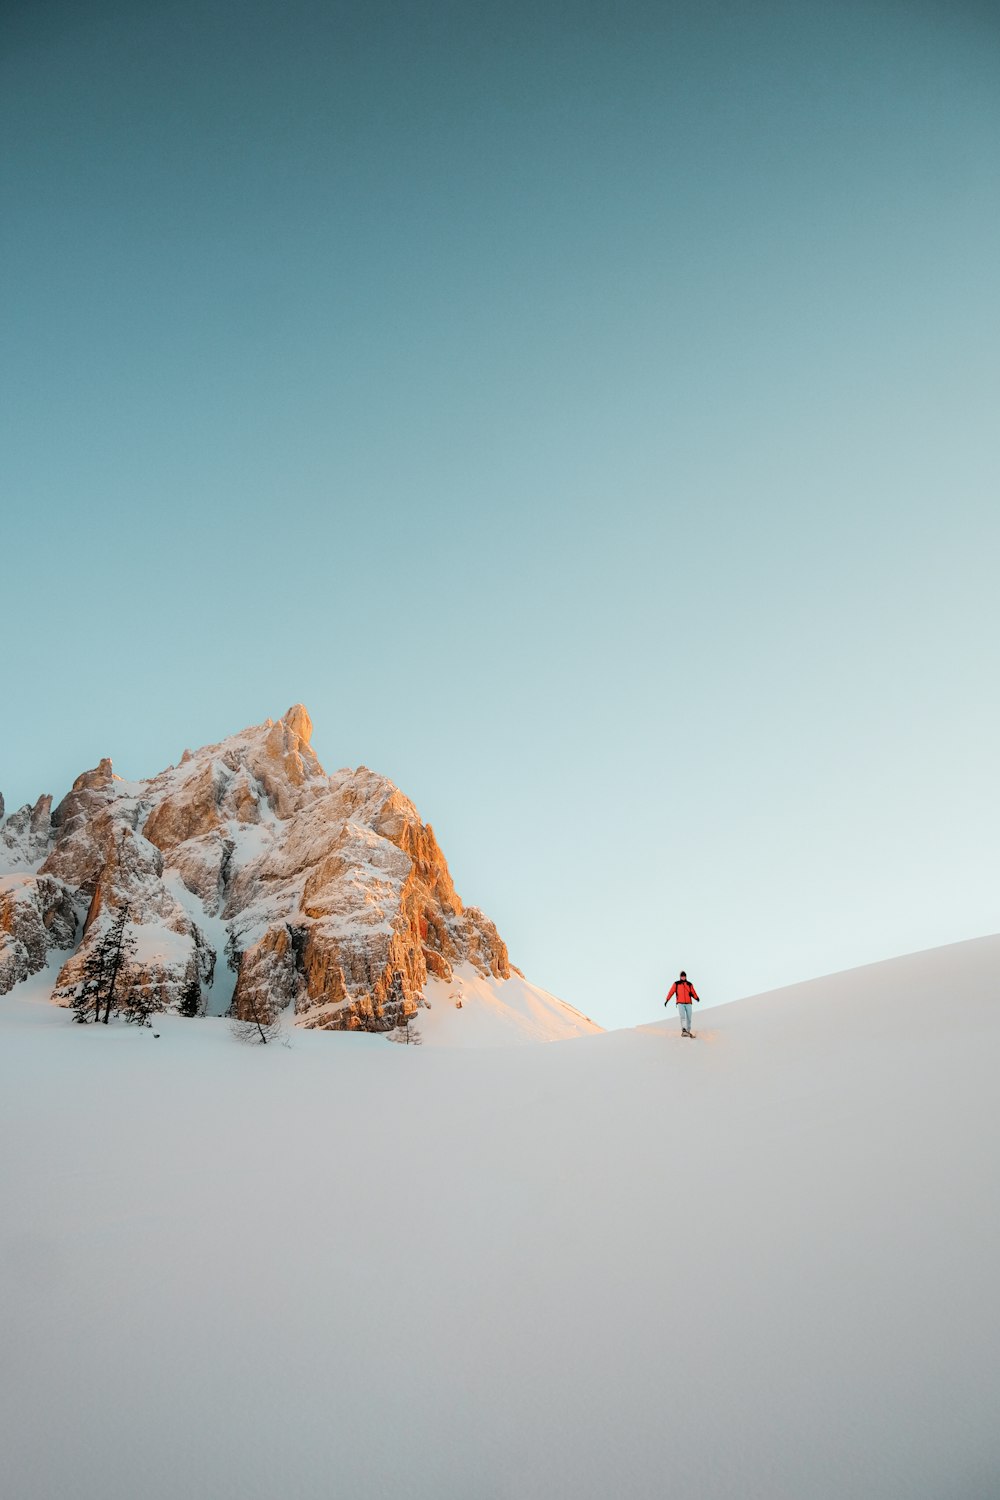 person in red jacket walking on snow covered ground during daytime